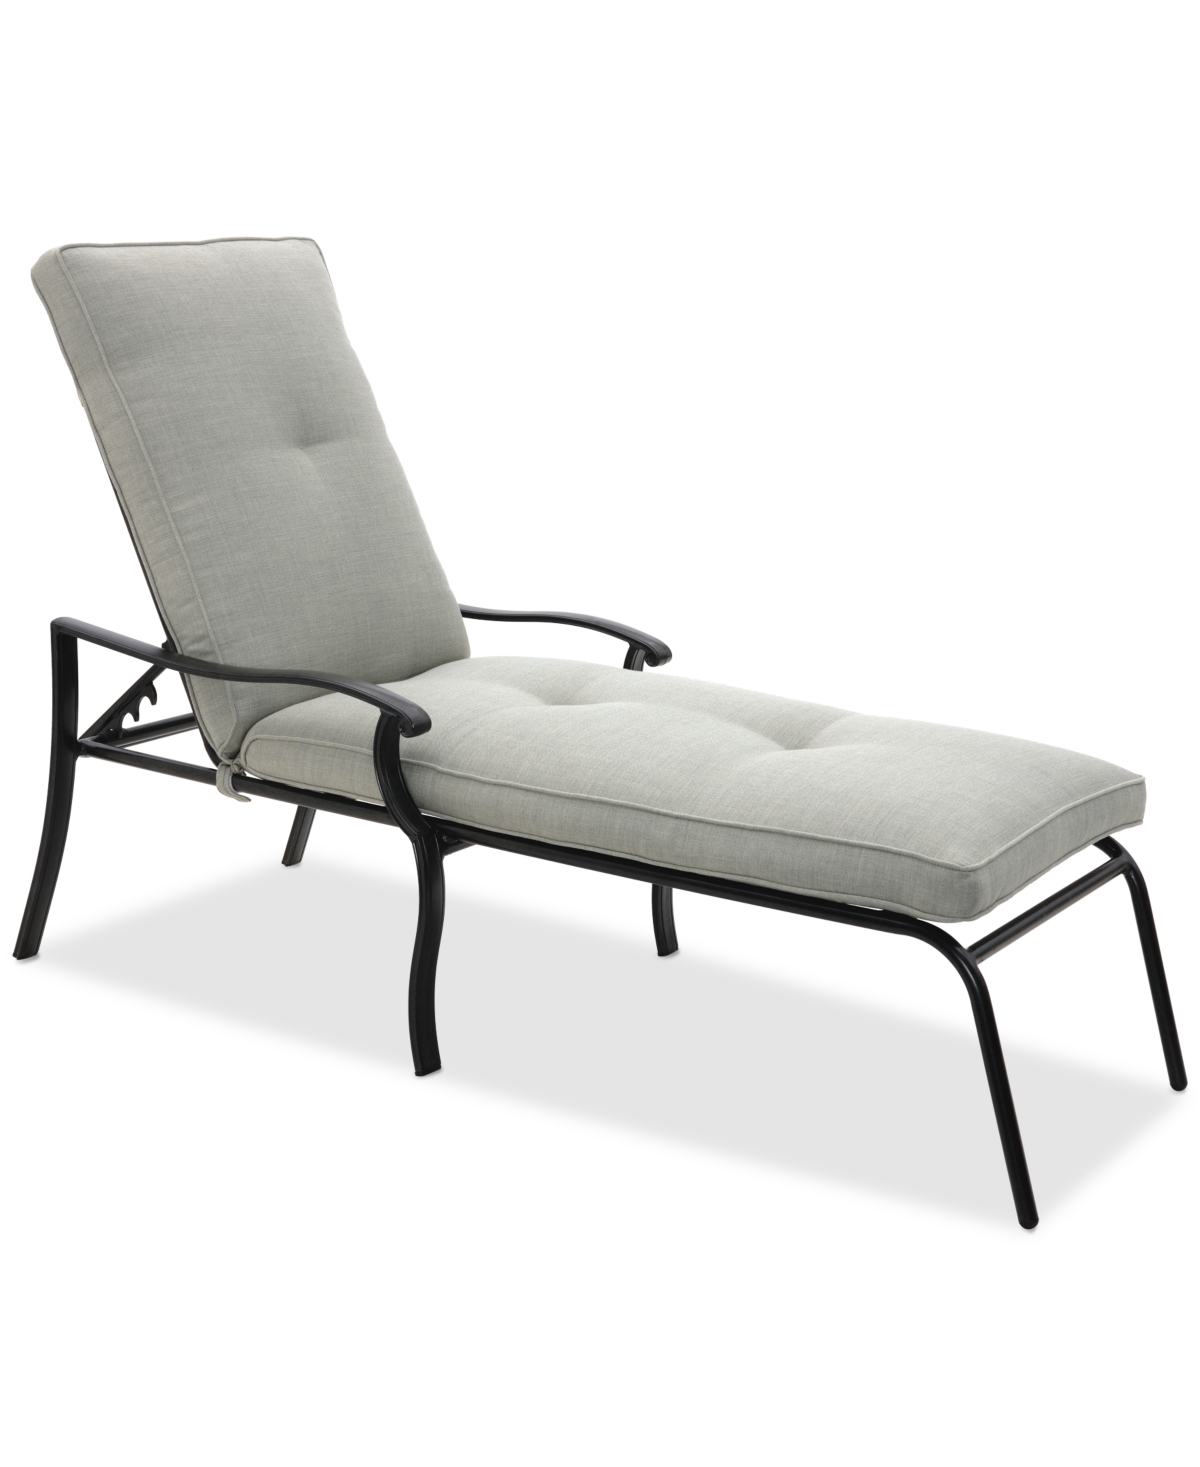 Agio Wythburn Mix And Match Lattice Outdoor Chaise Lounge In Oyster Light Grey,bronze Finish